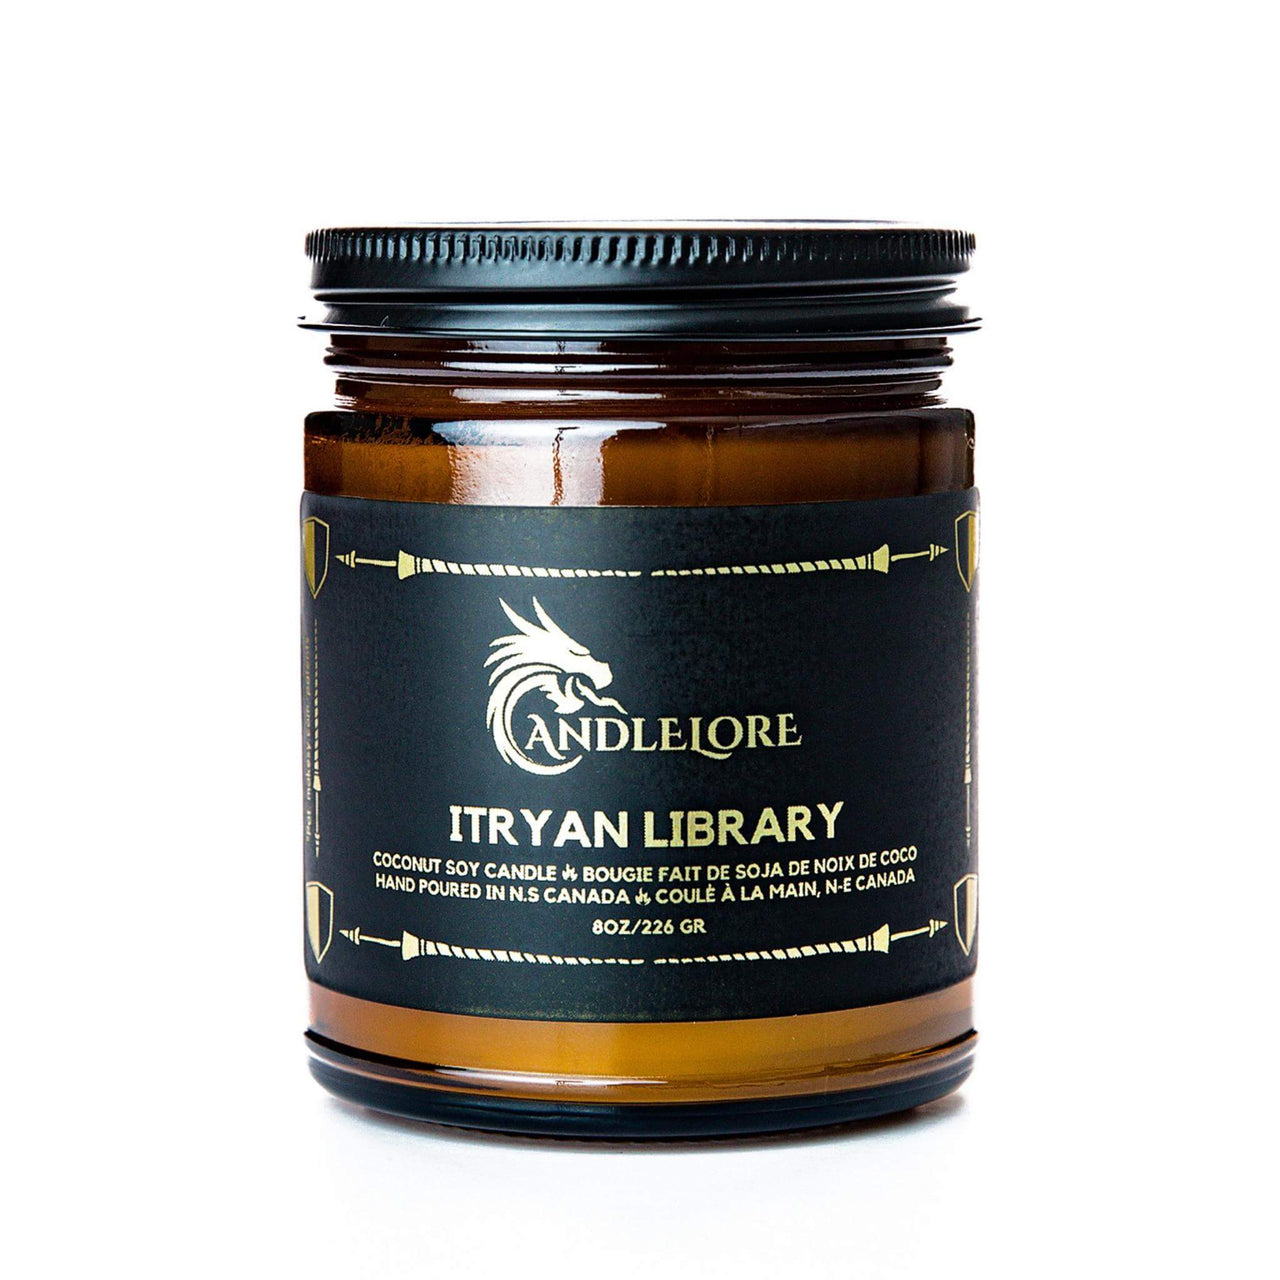 Medium Itryan Library Scented Candle on a white background